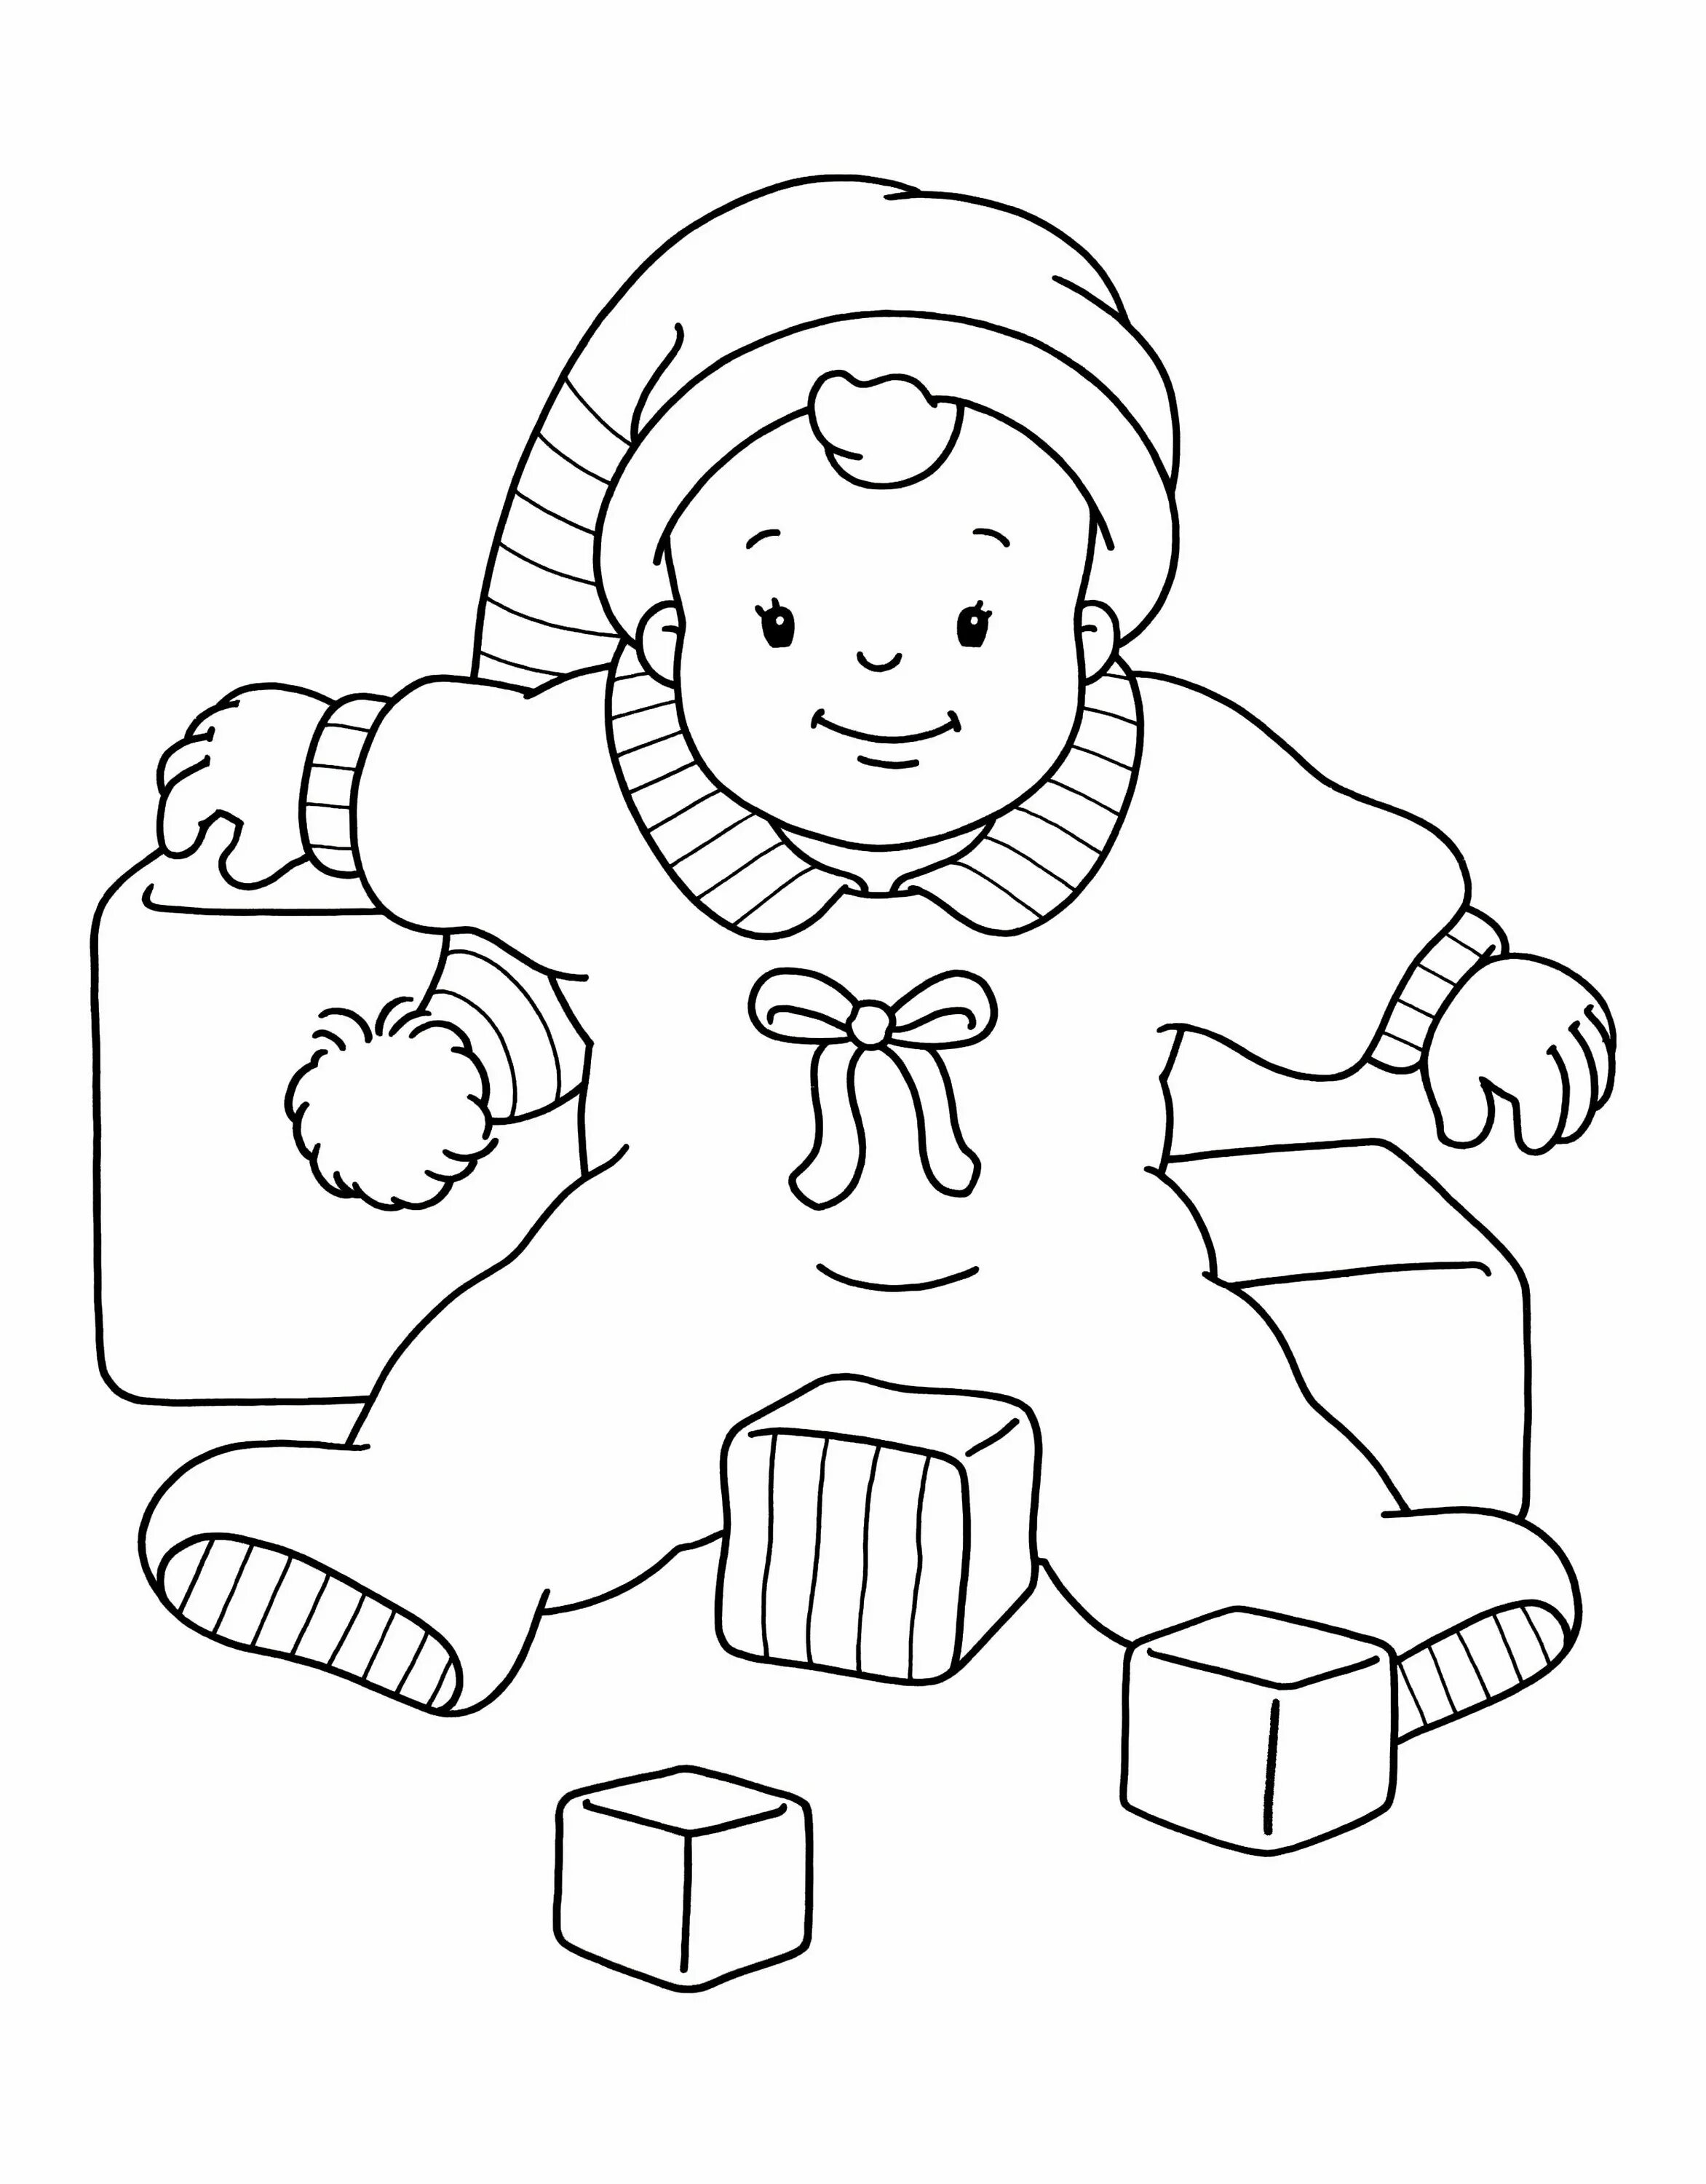 Fluffy coloring pages for dolls